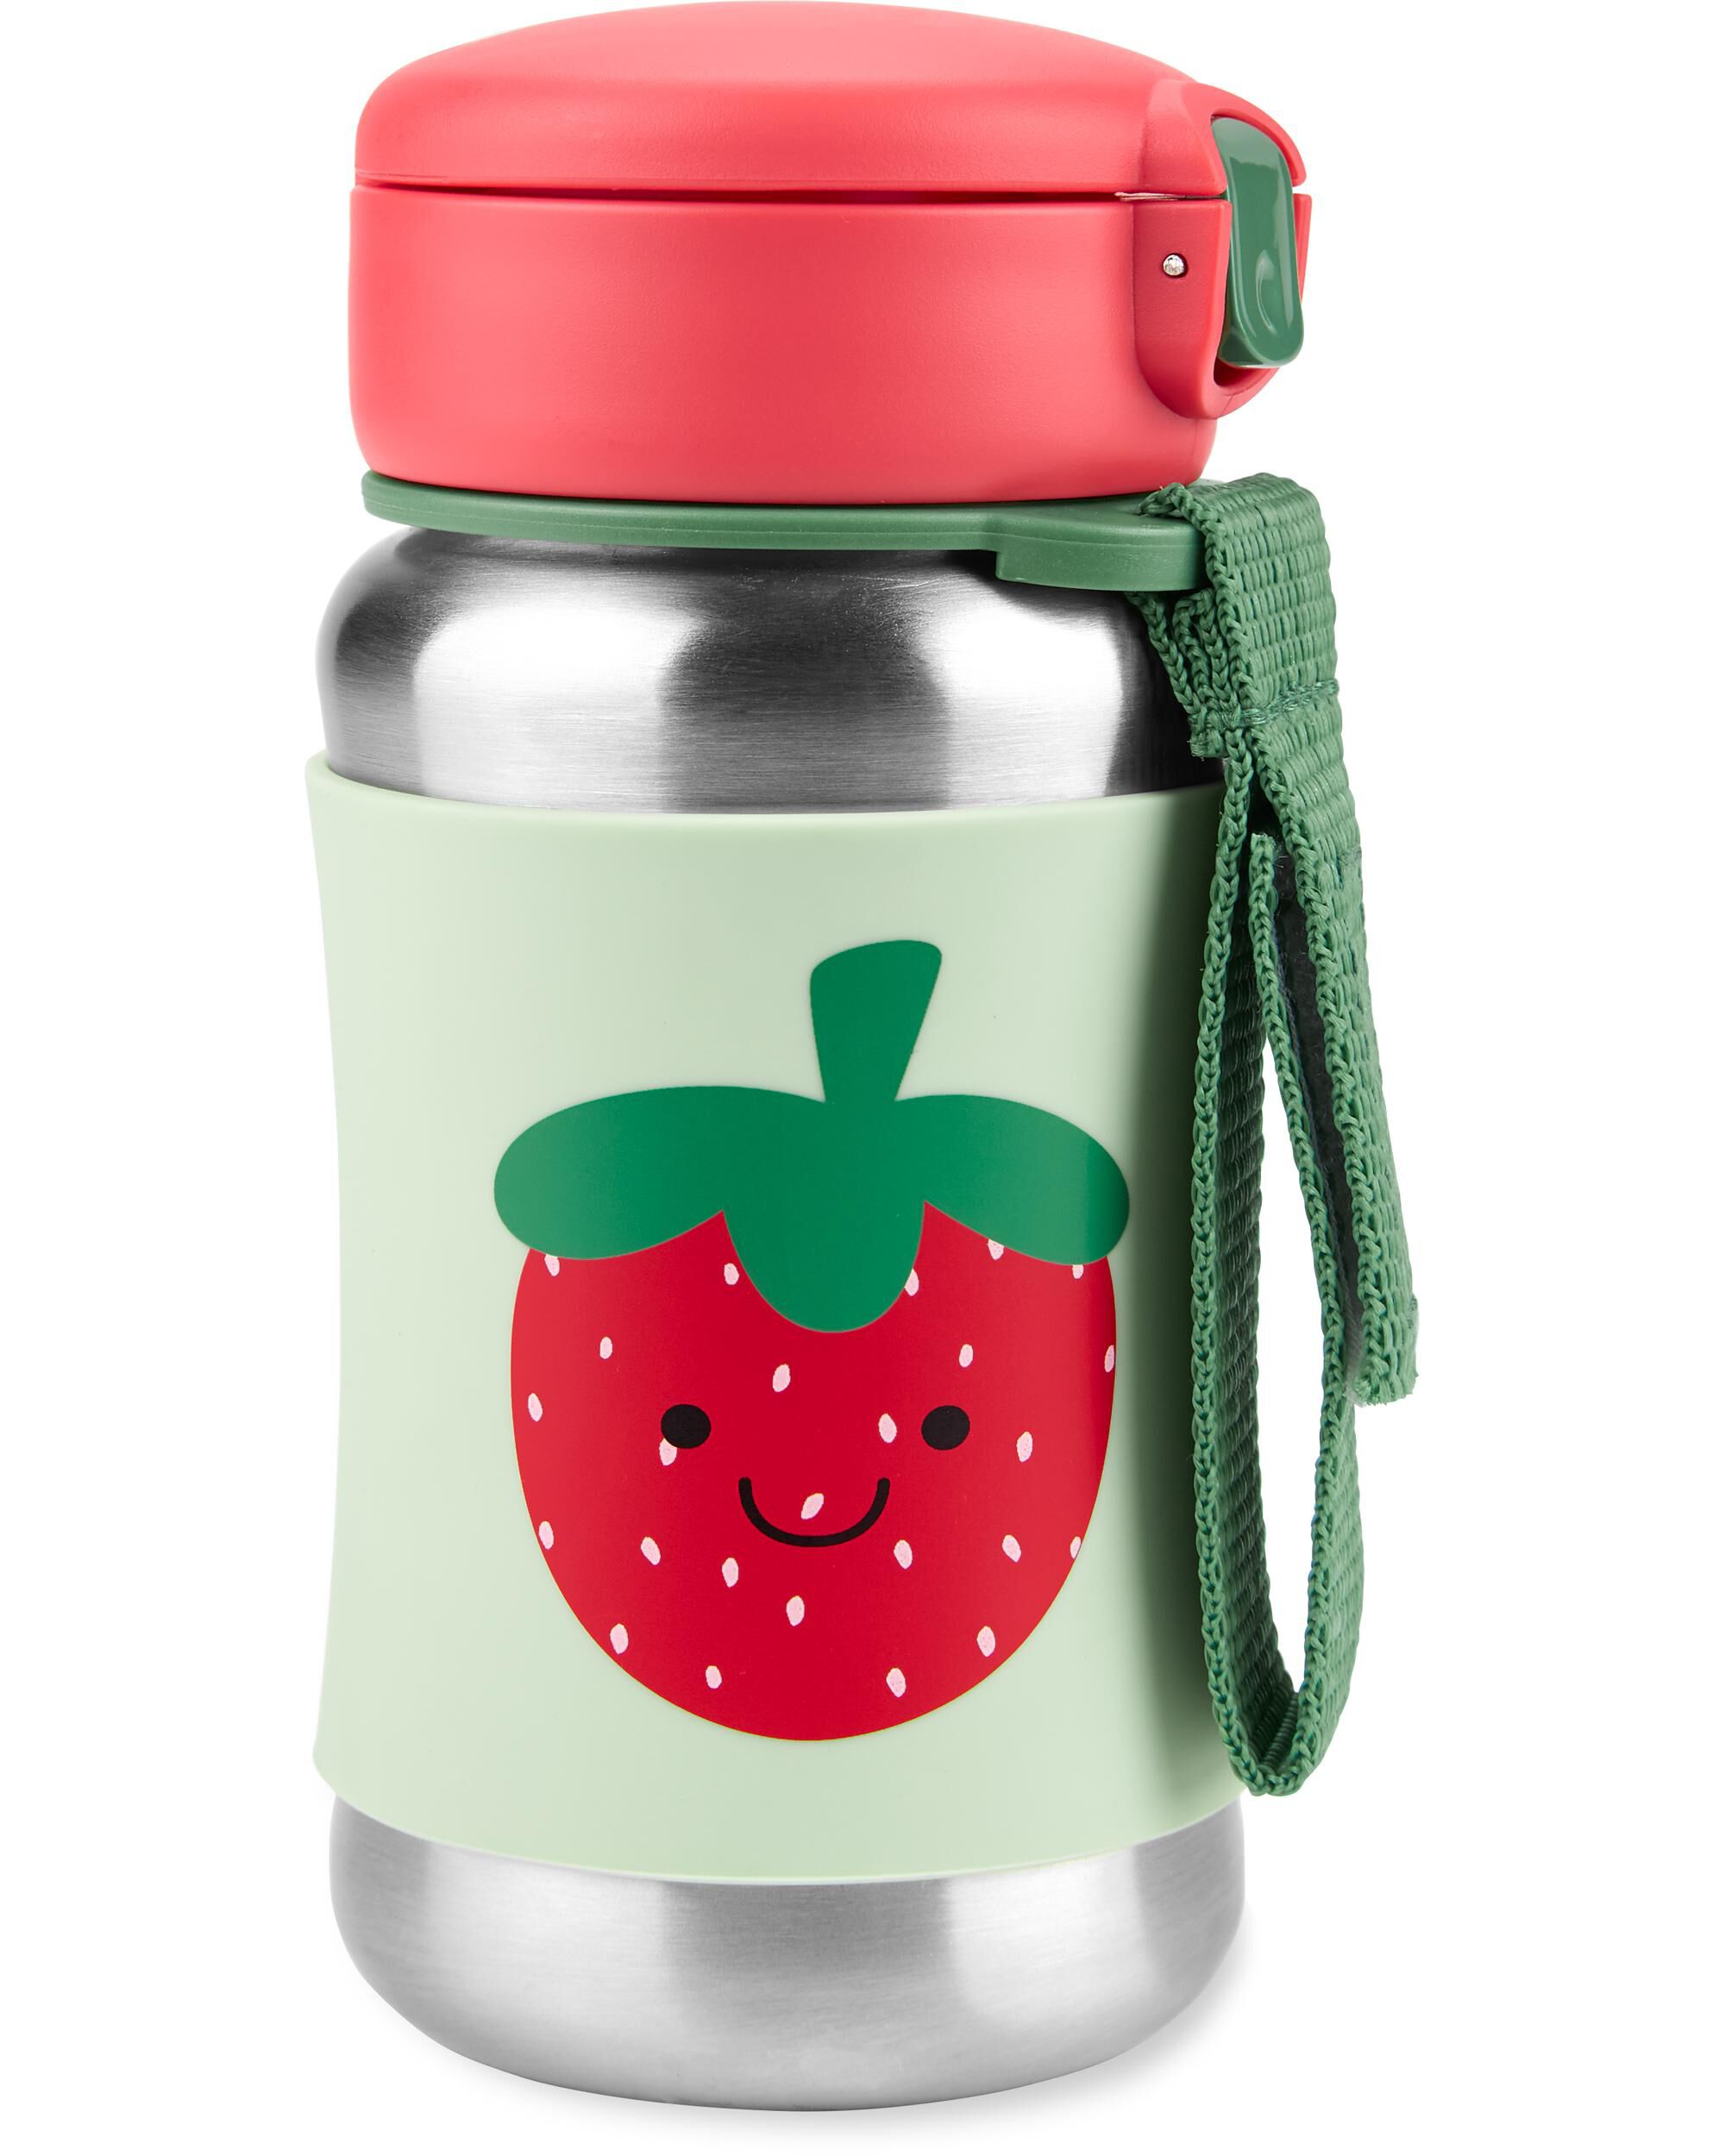 Carters Spark Style Stainless Steel Straw Bottle - Strawberry